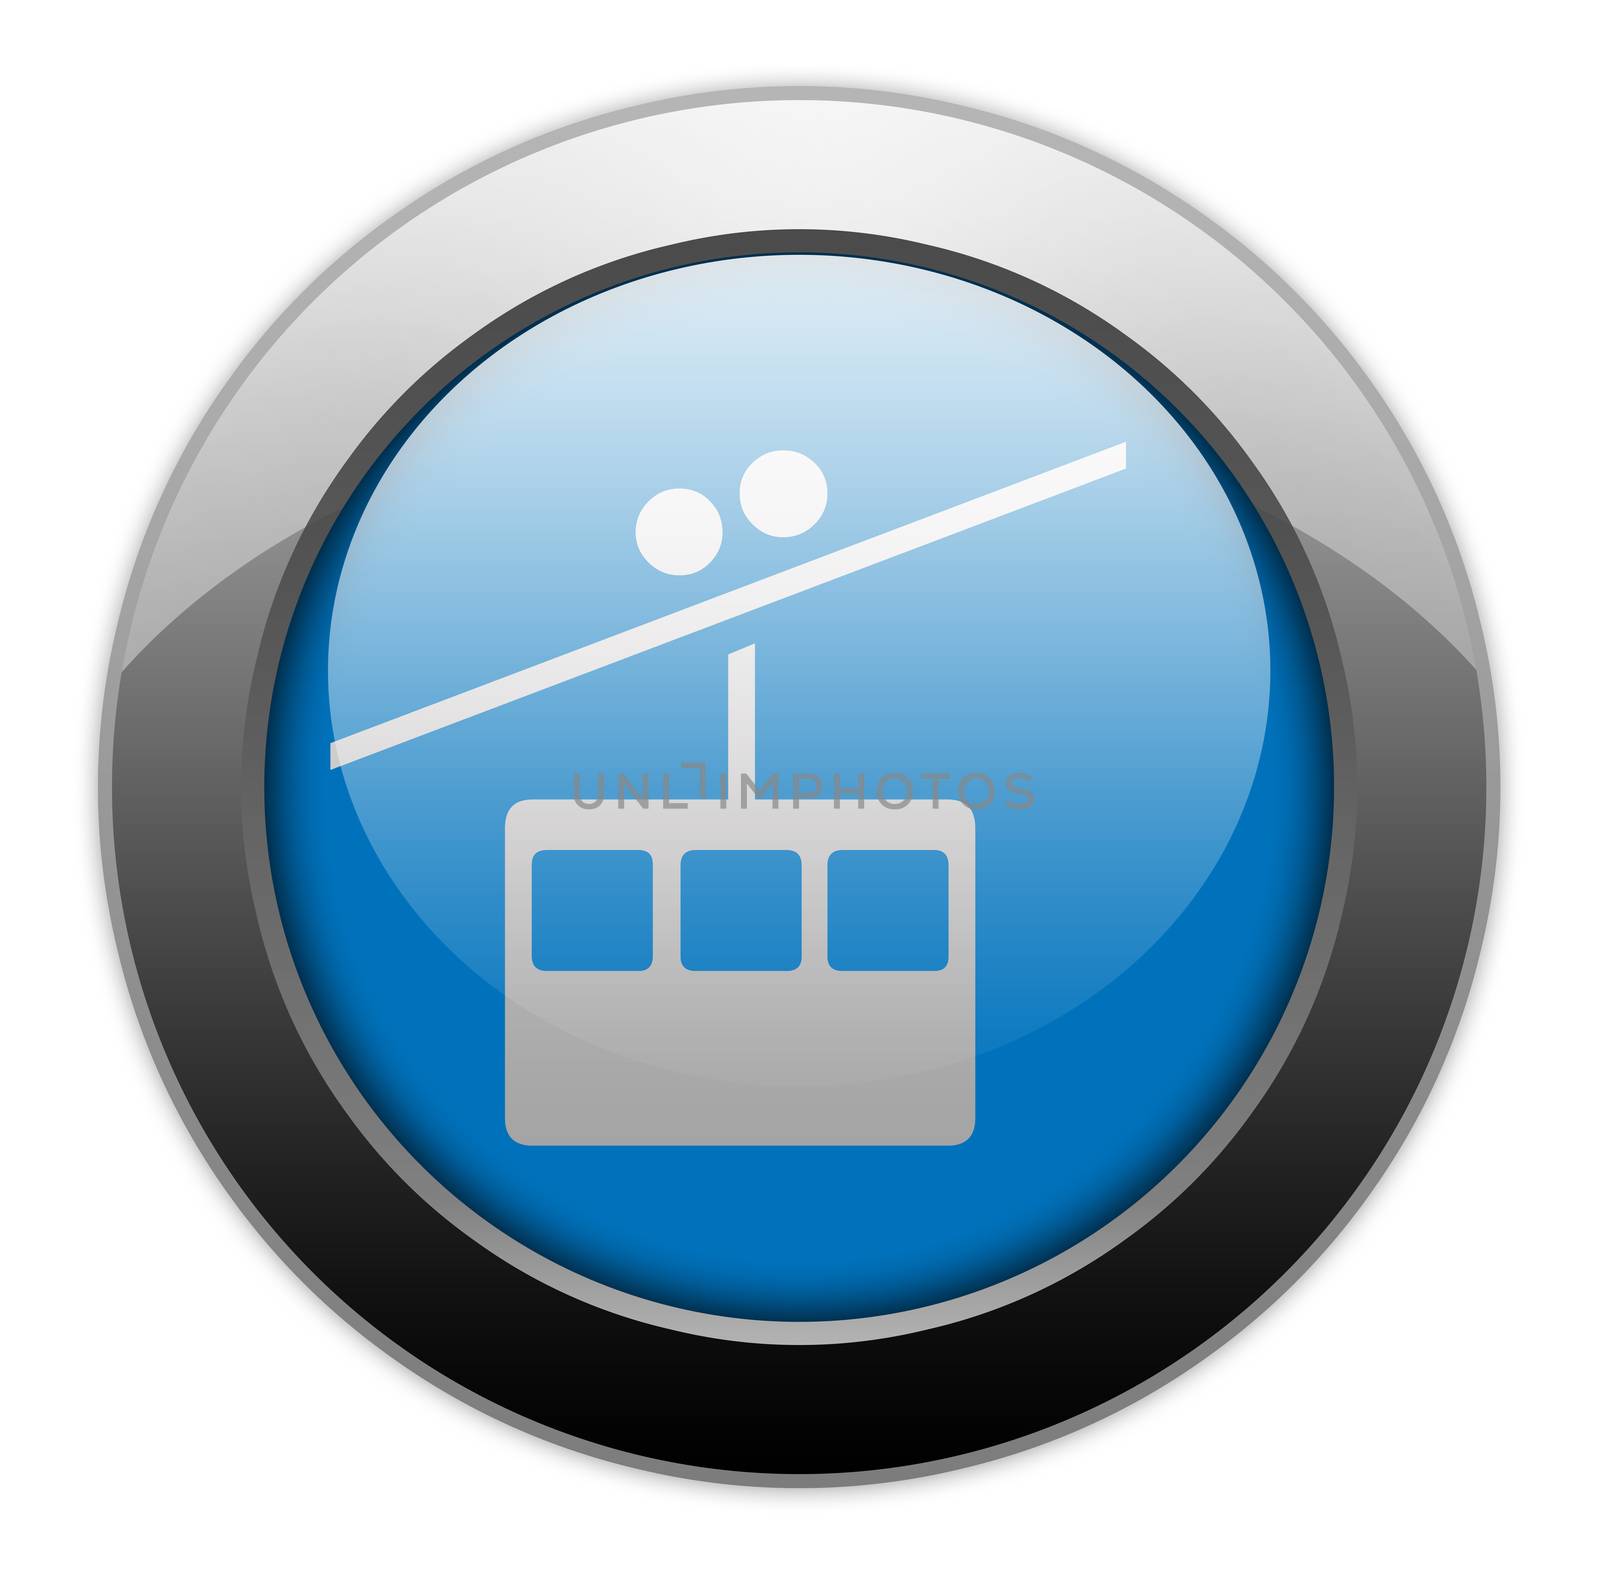 Icon, Button, Pictogram with Aerial Tramway symbol